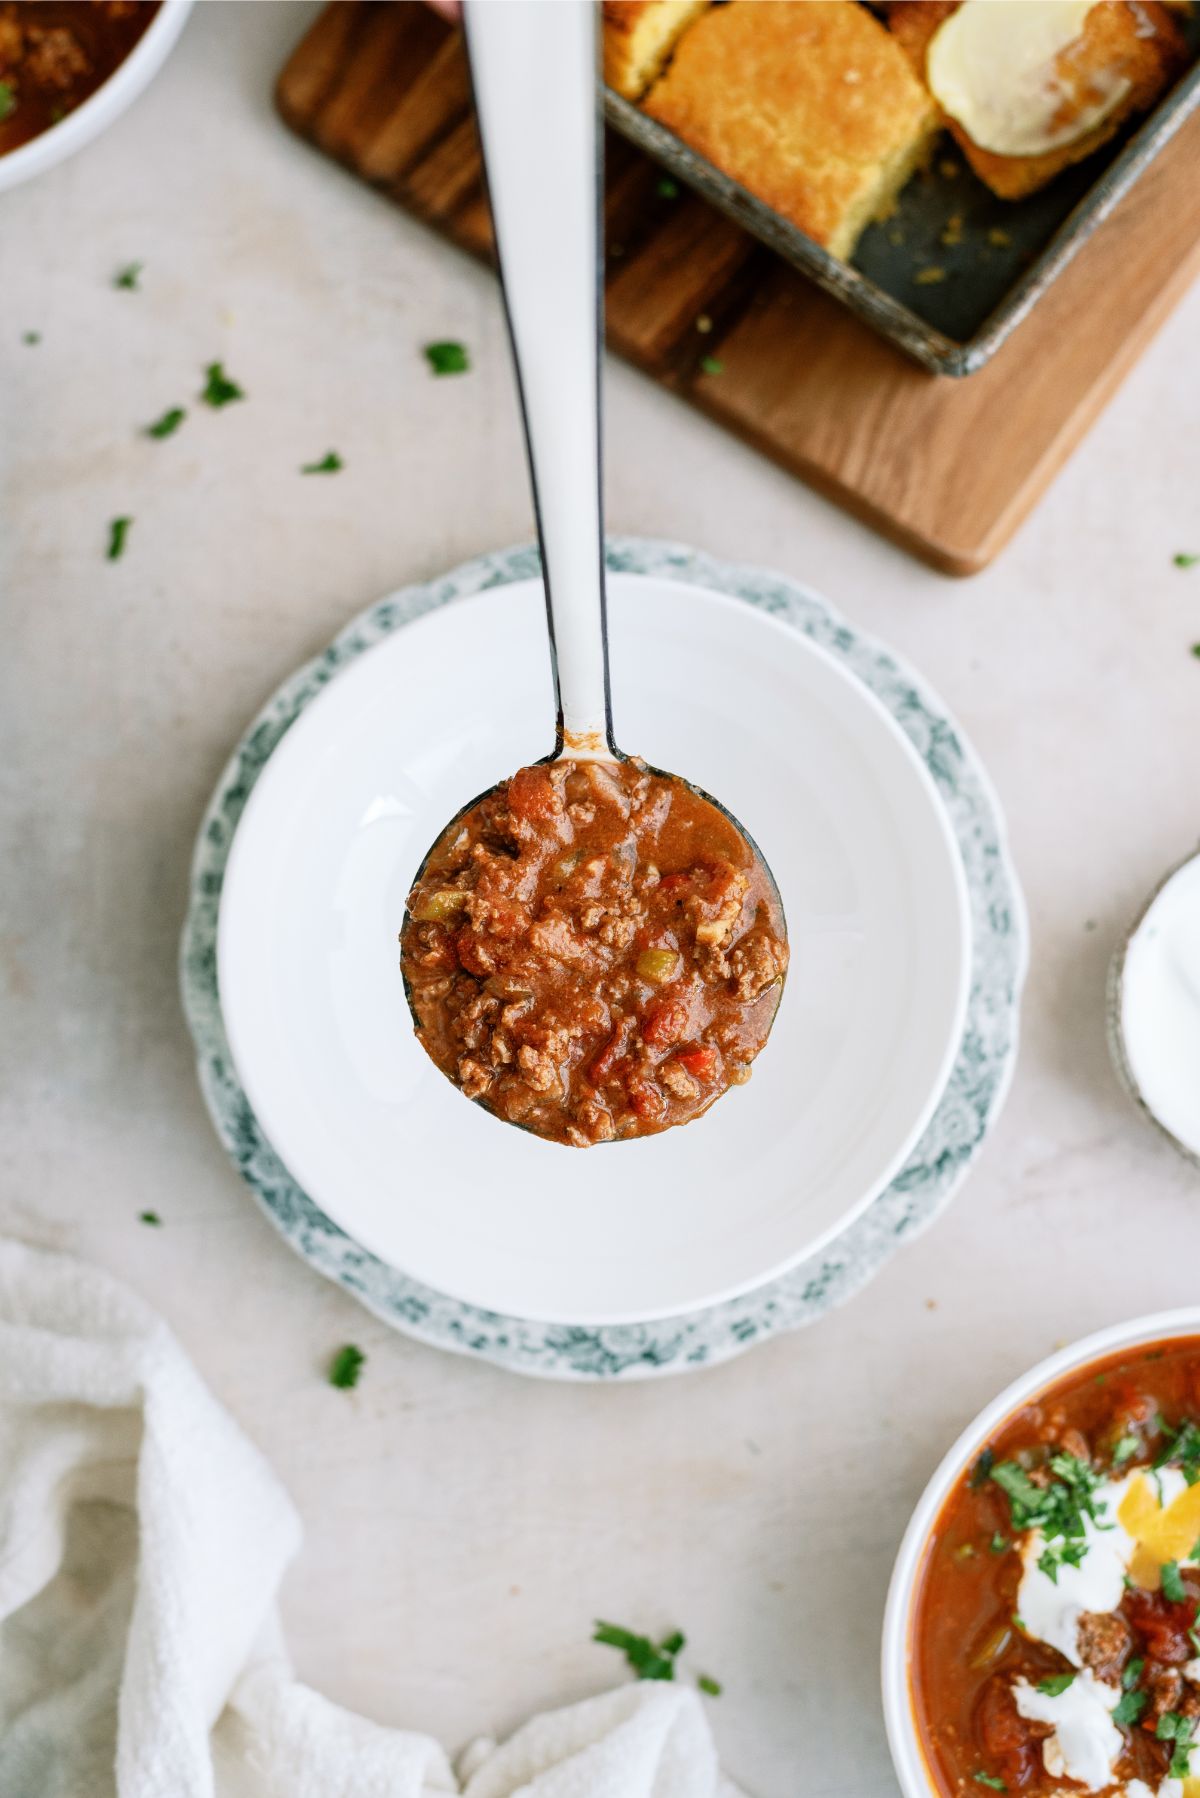 A scoop of Instant Pot No-Bean Chili with Ground Beef going into a bowl